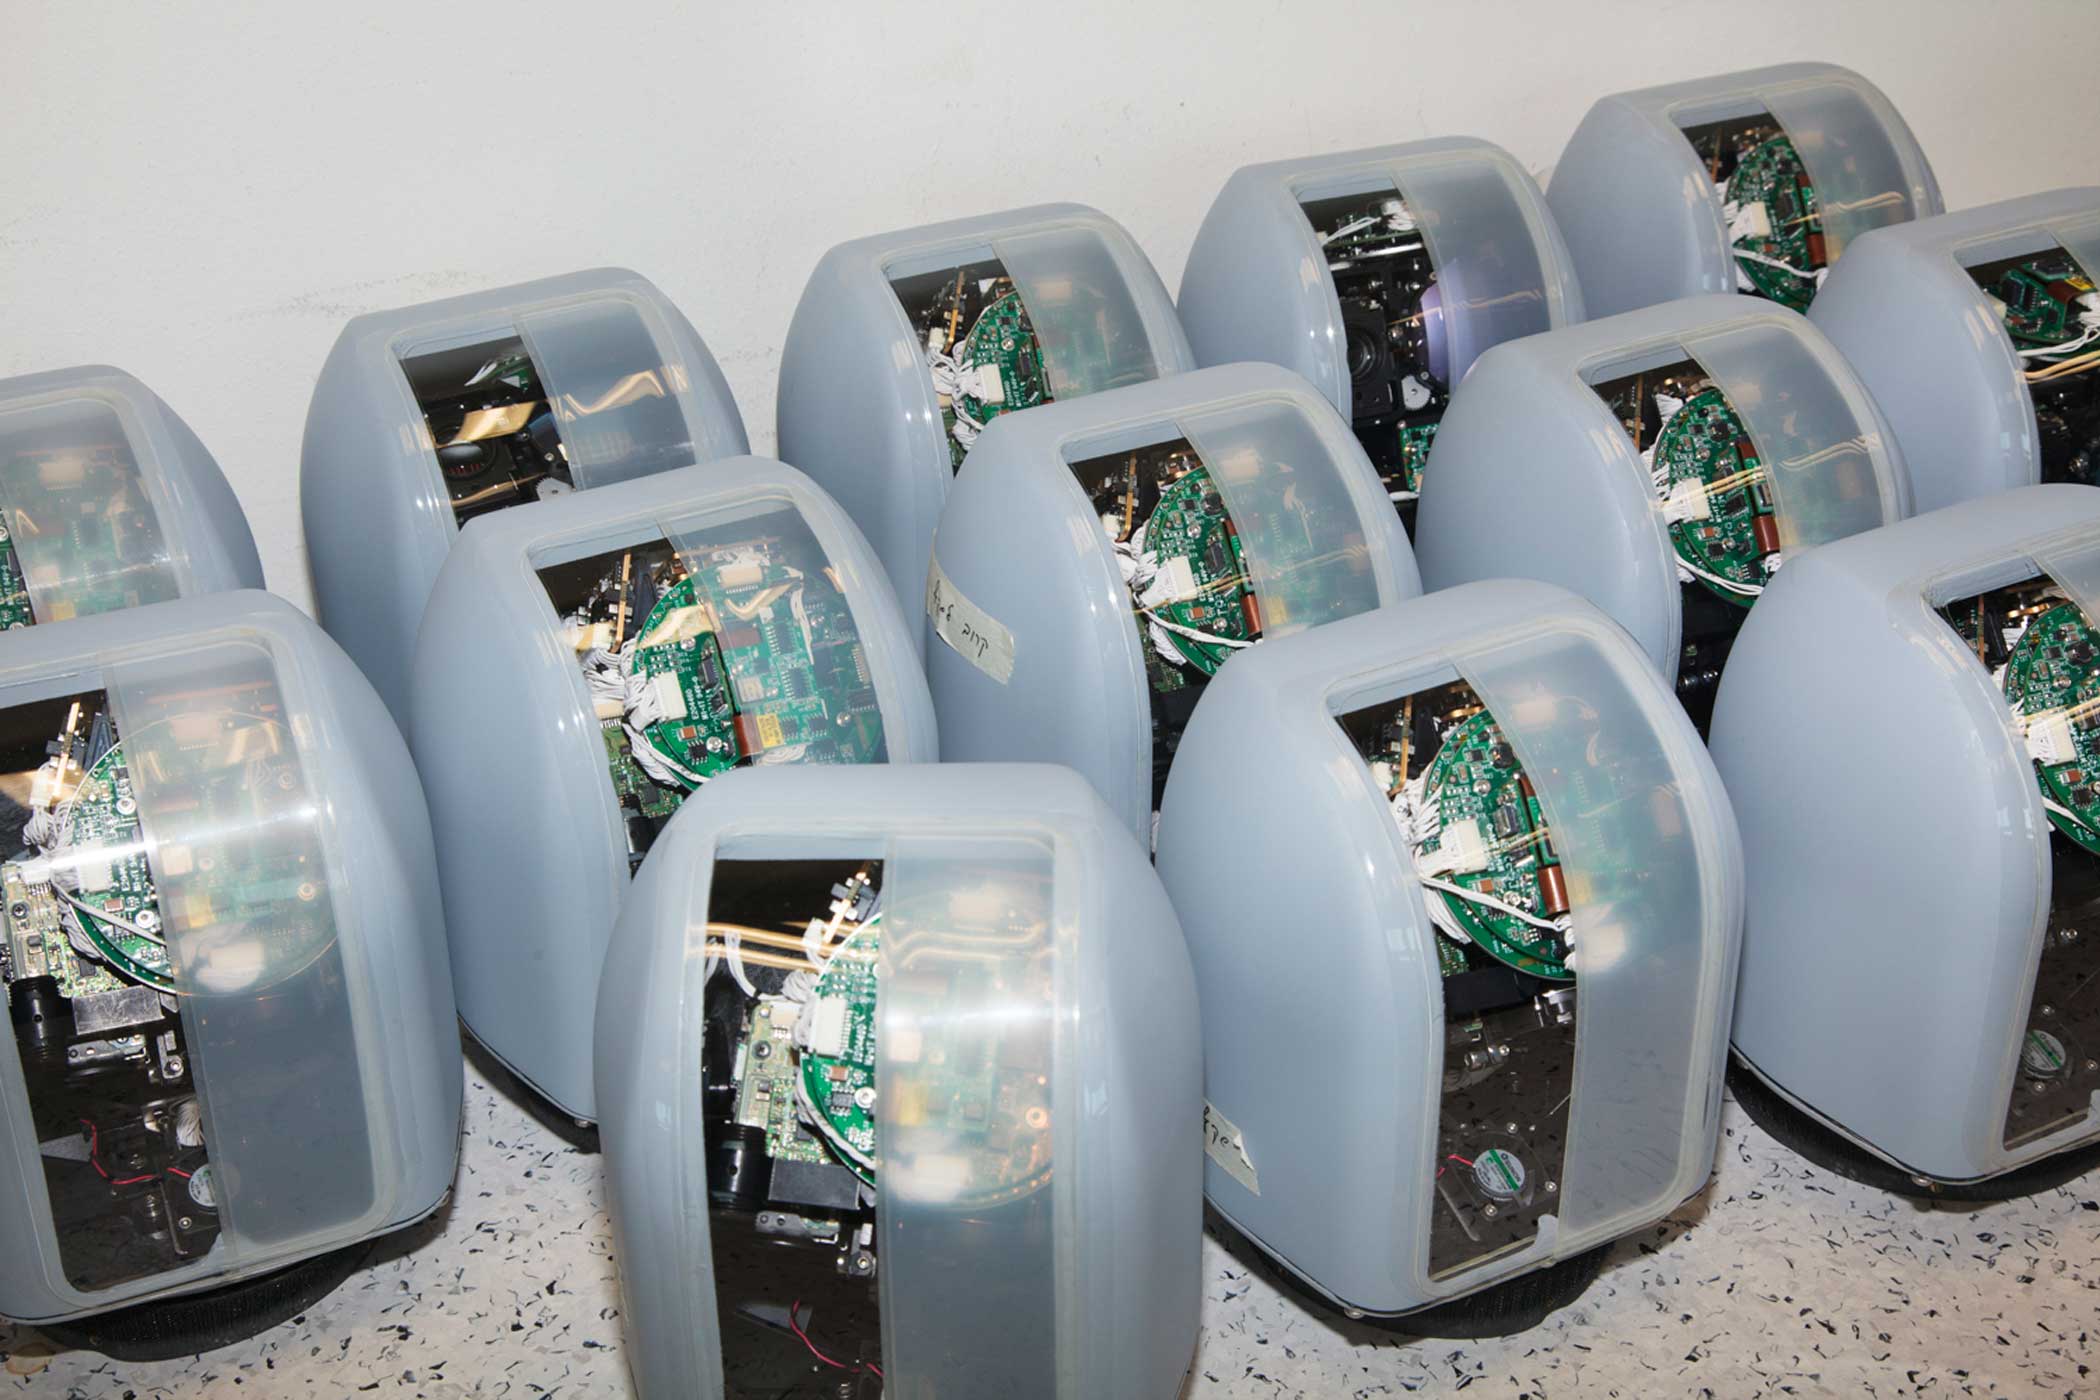 A group of Micro-STAMP imaging payloads, made by Controp at the company’s factory outside of Petah-Tikva, Israel. Each unit has a color video camera as well as an infrared thermal imaging camera that can see at night or through thick cloud cover and fog.